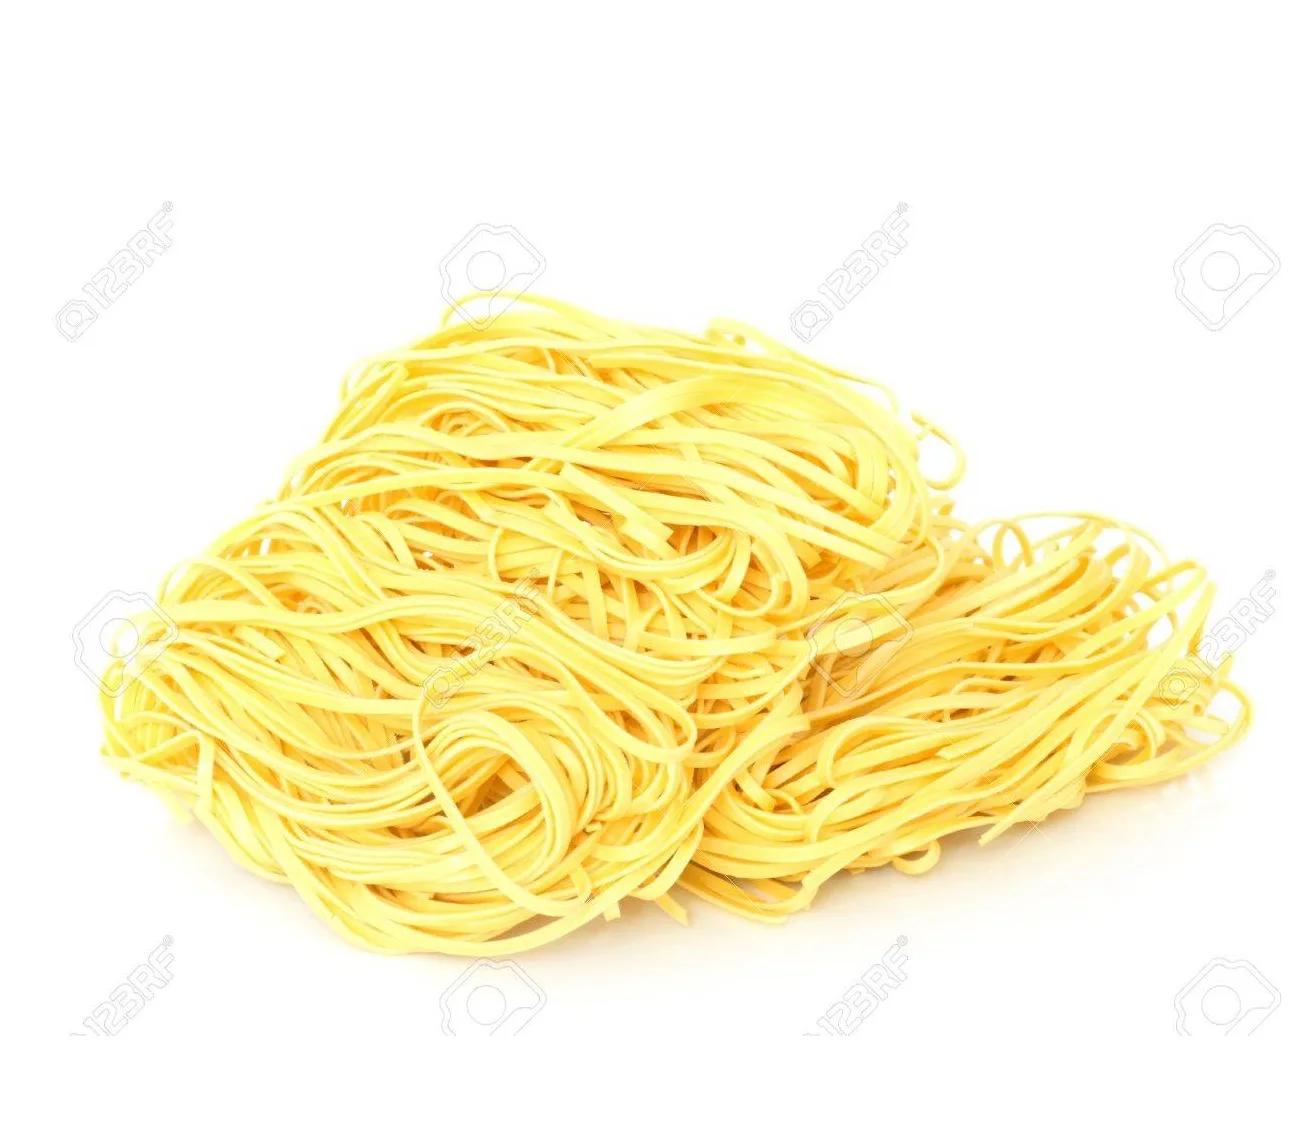 Egg Noodles Minh Ngoc Vermicelli Brand Best Quality Wholesaler Hot Selling Price Low MOQ From Vietnam Supplier